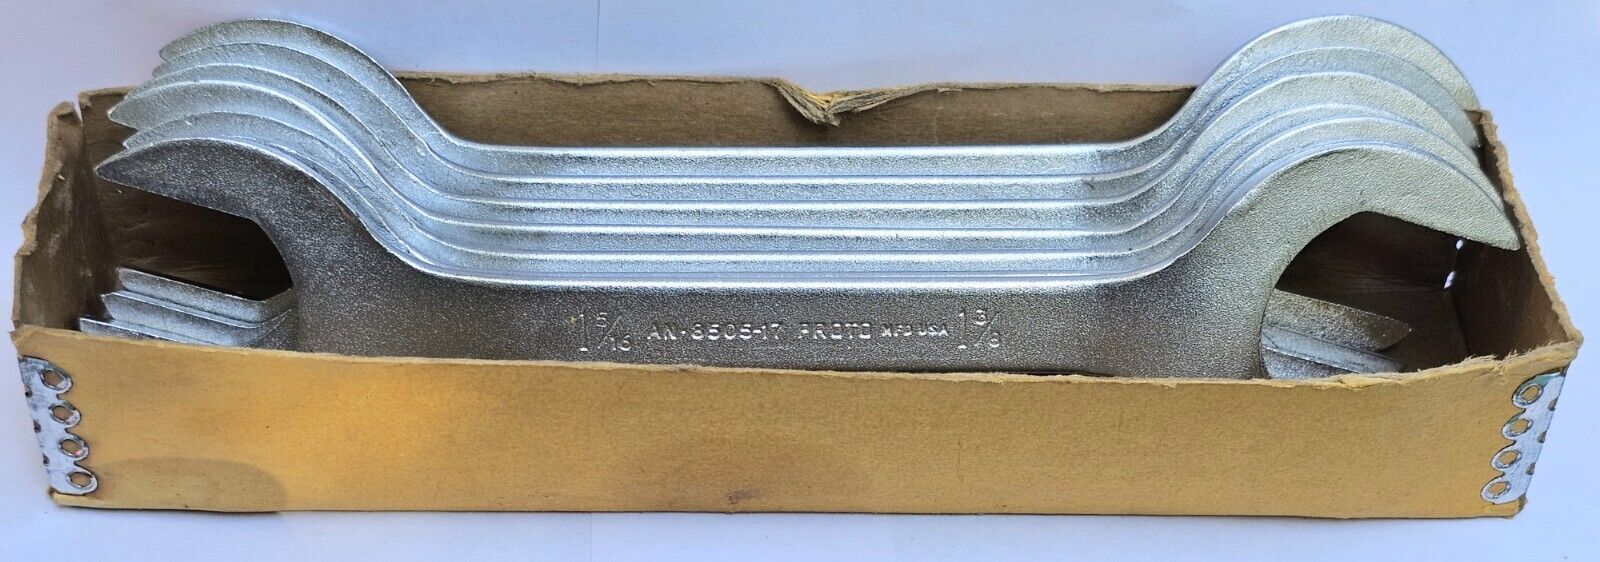 NOS Box of 7 PROTO Open End 1-5/16” × 1-3/8” Hydraulic Aircraft Wrench AN8505-17